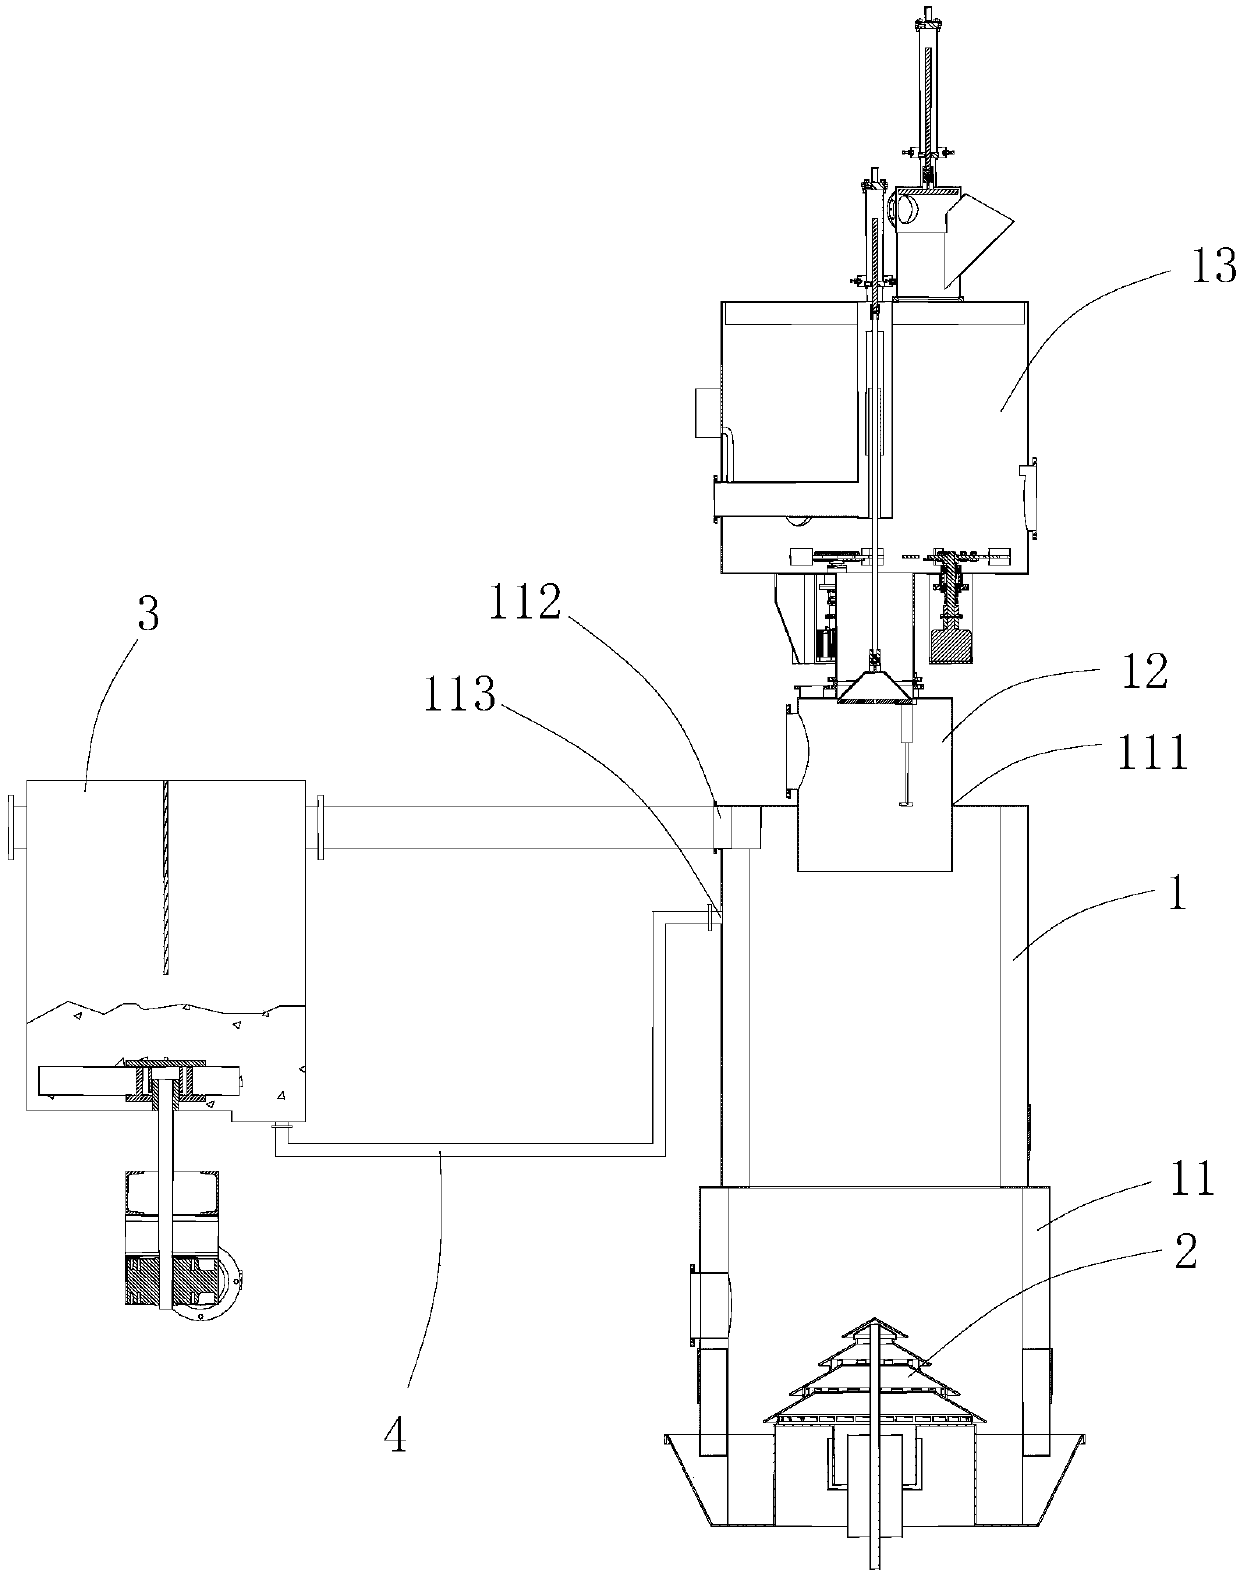 Treatment technology for preparing combustion gas by using biomass fixed-bed gasifier